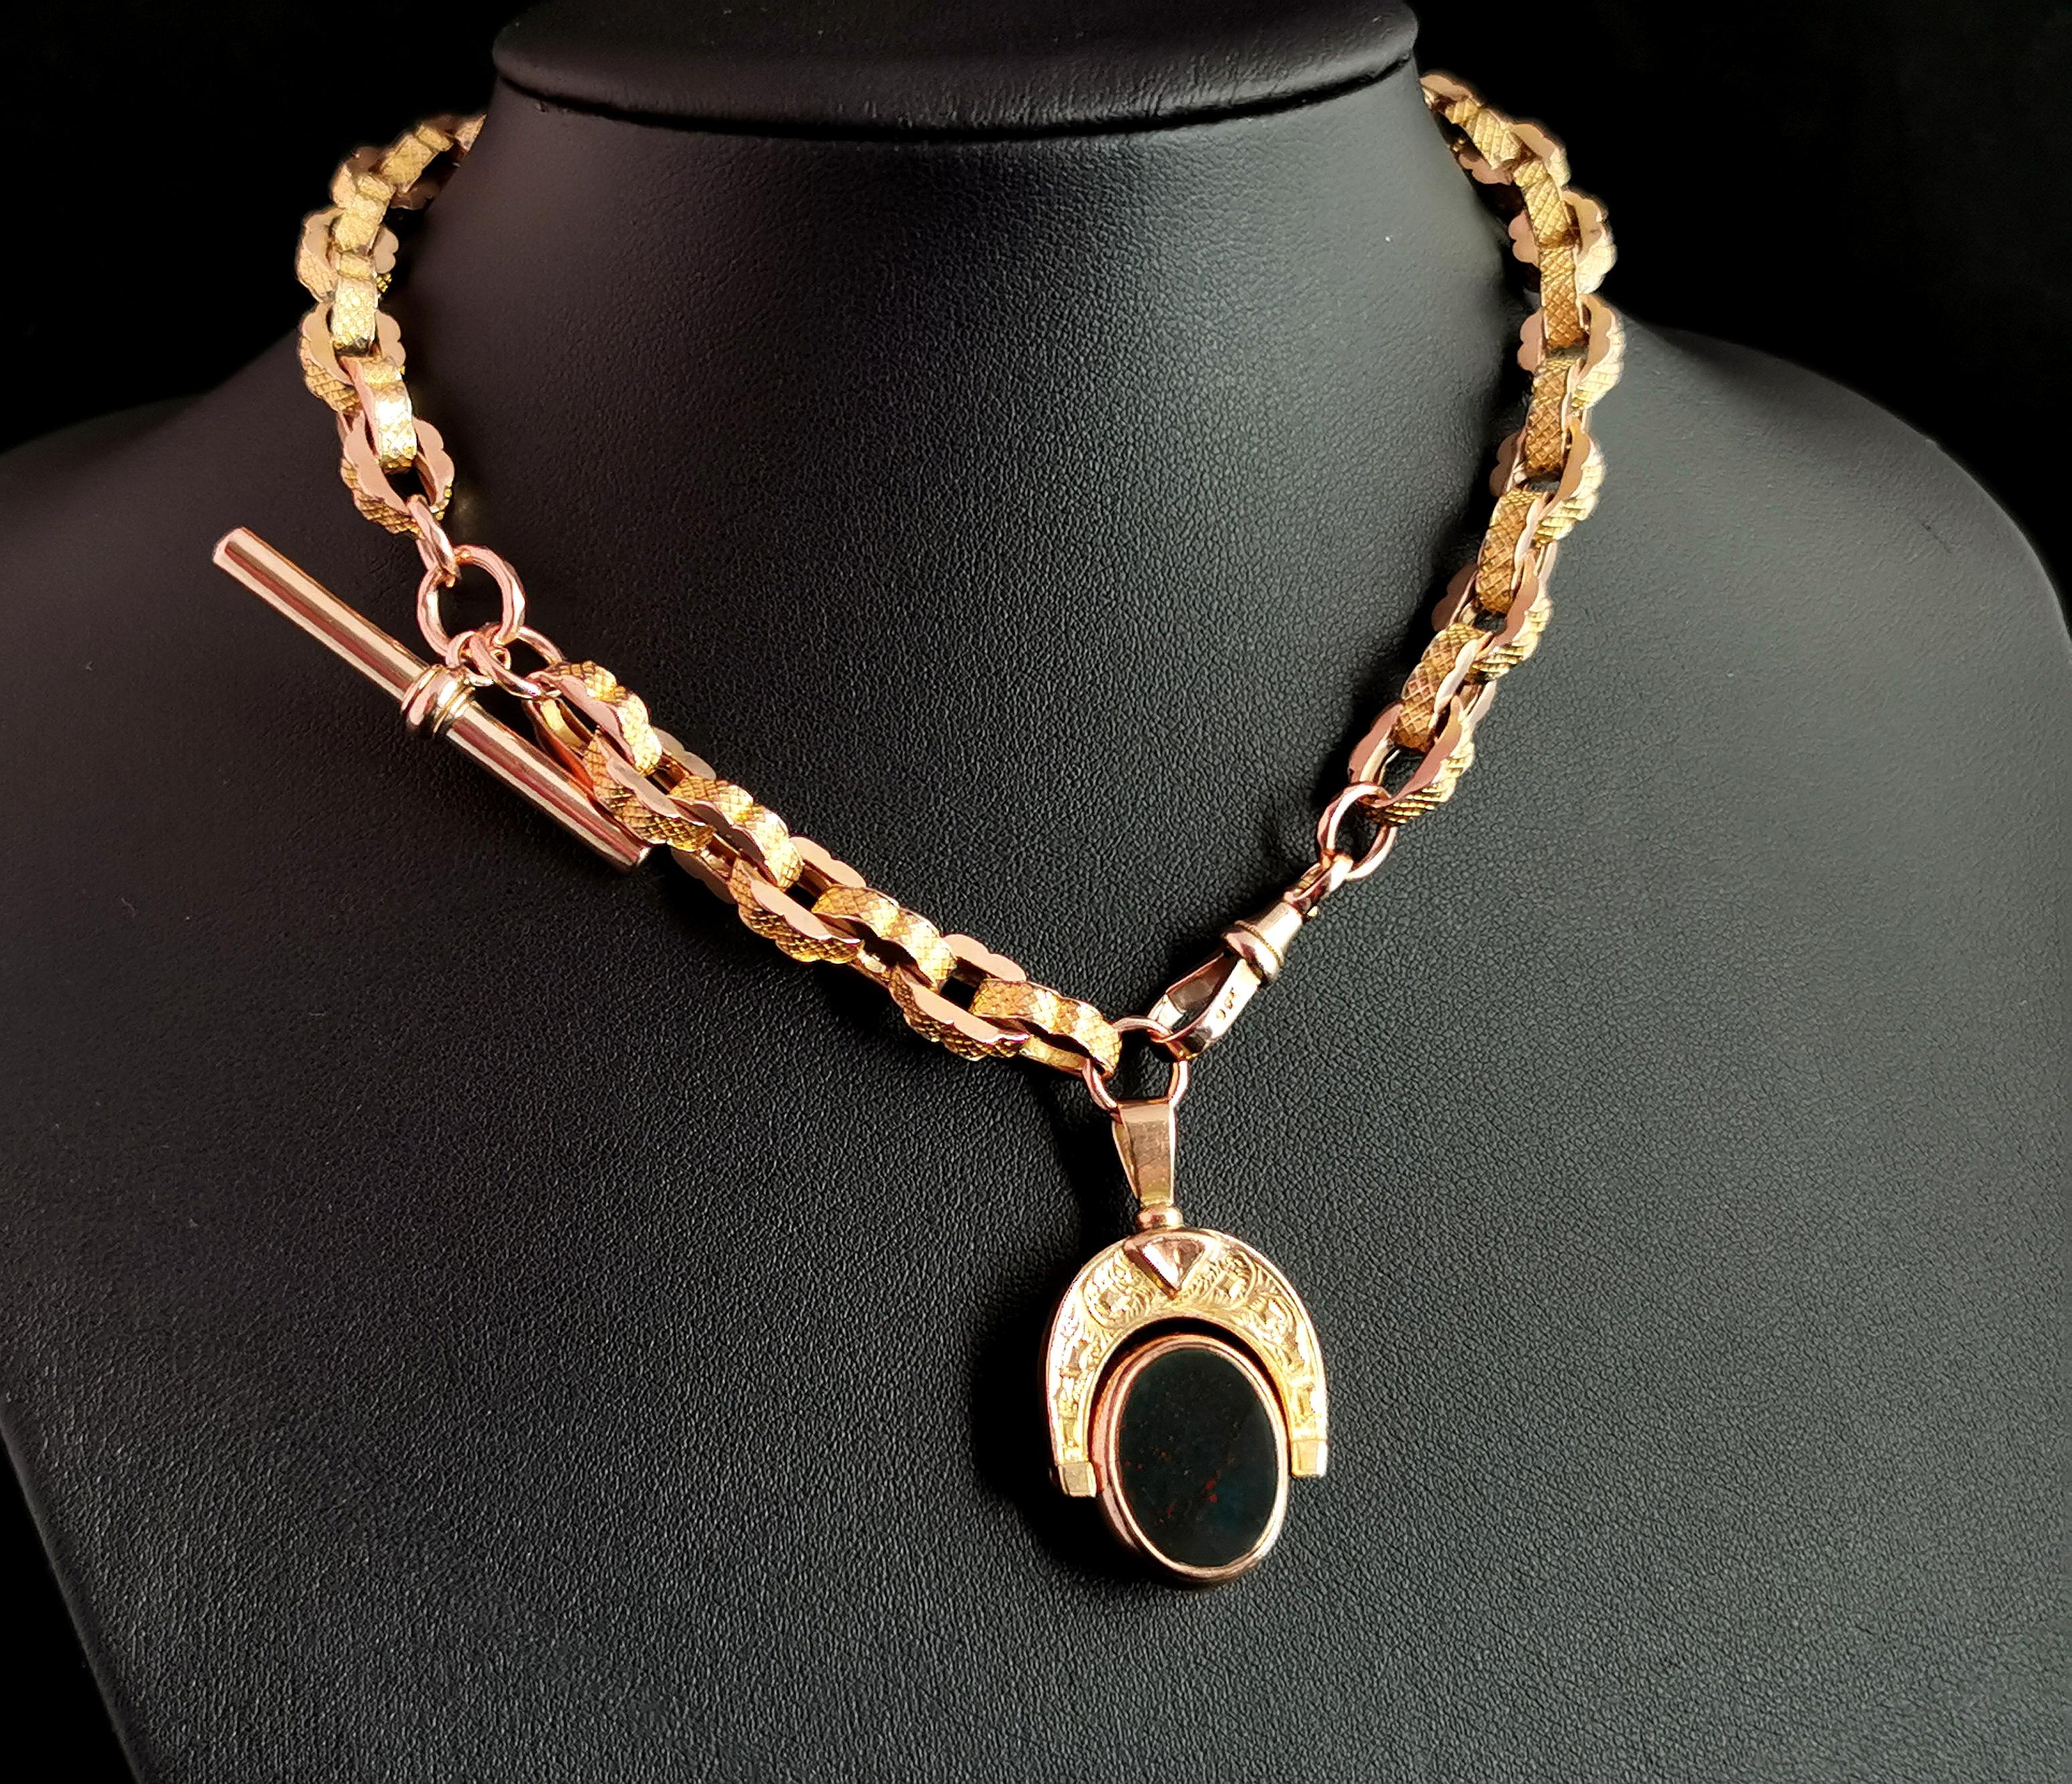 An impeccable antique Victorian era 9kt yellow gold Albert chain or watch chain.

This Albert is a single Albert chain crafted from special fancy engraved gold links, the links are very chunky but hollow so the chain remains easy to wear.

It has a